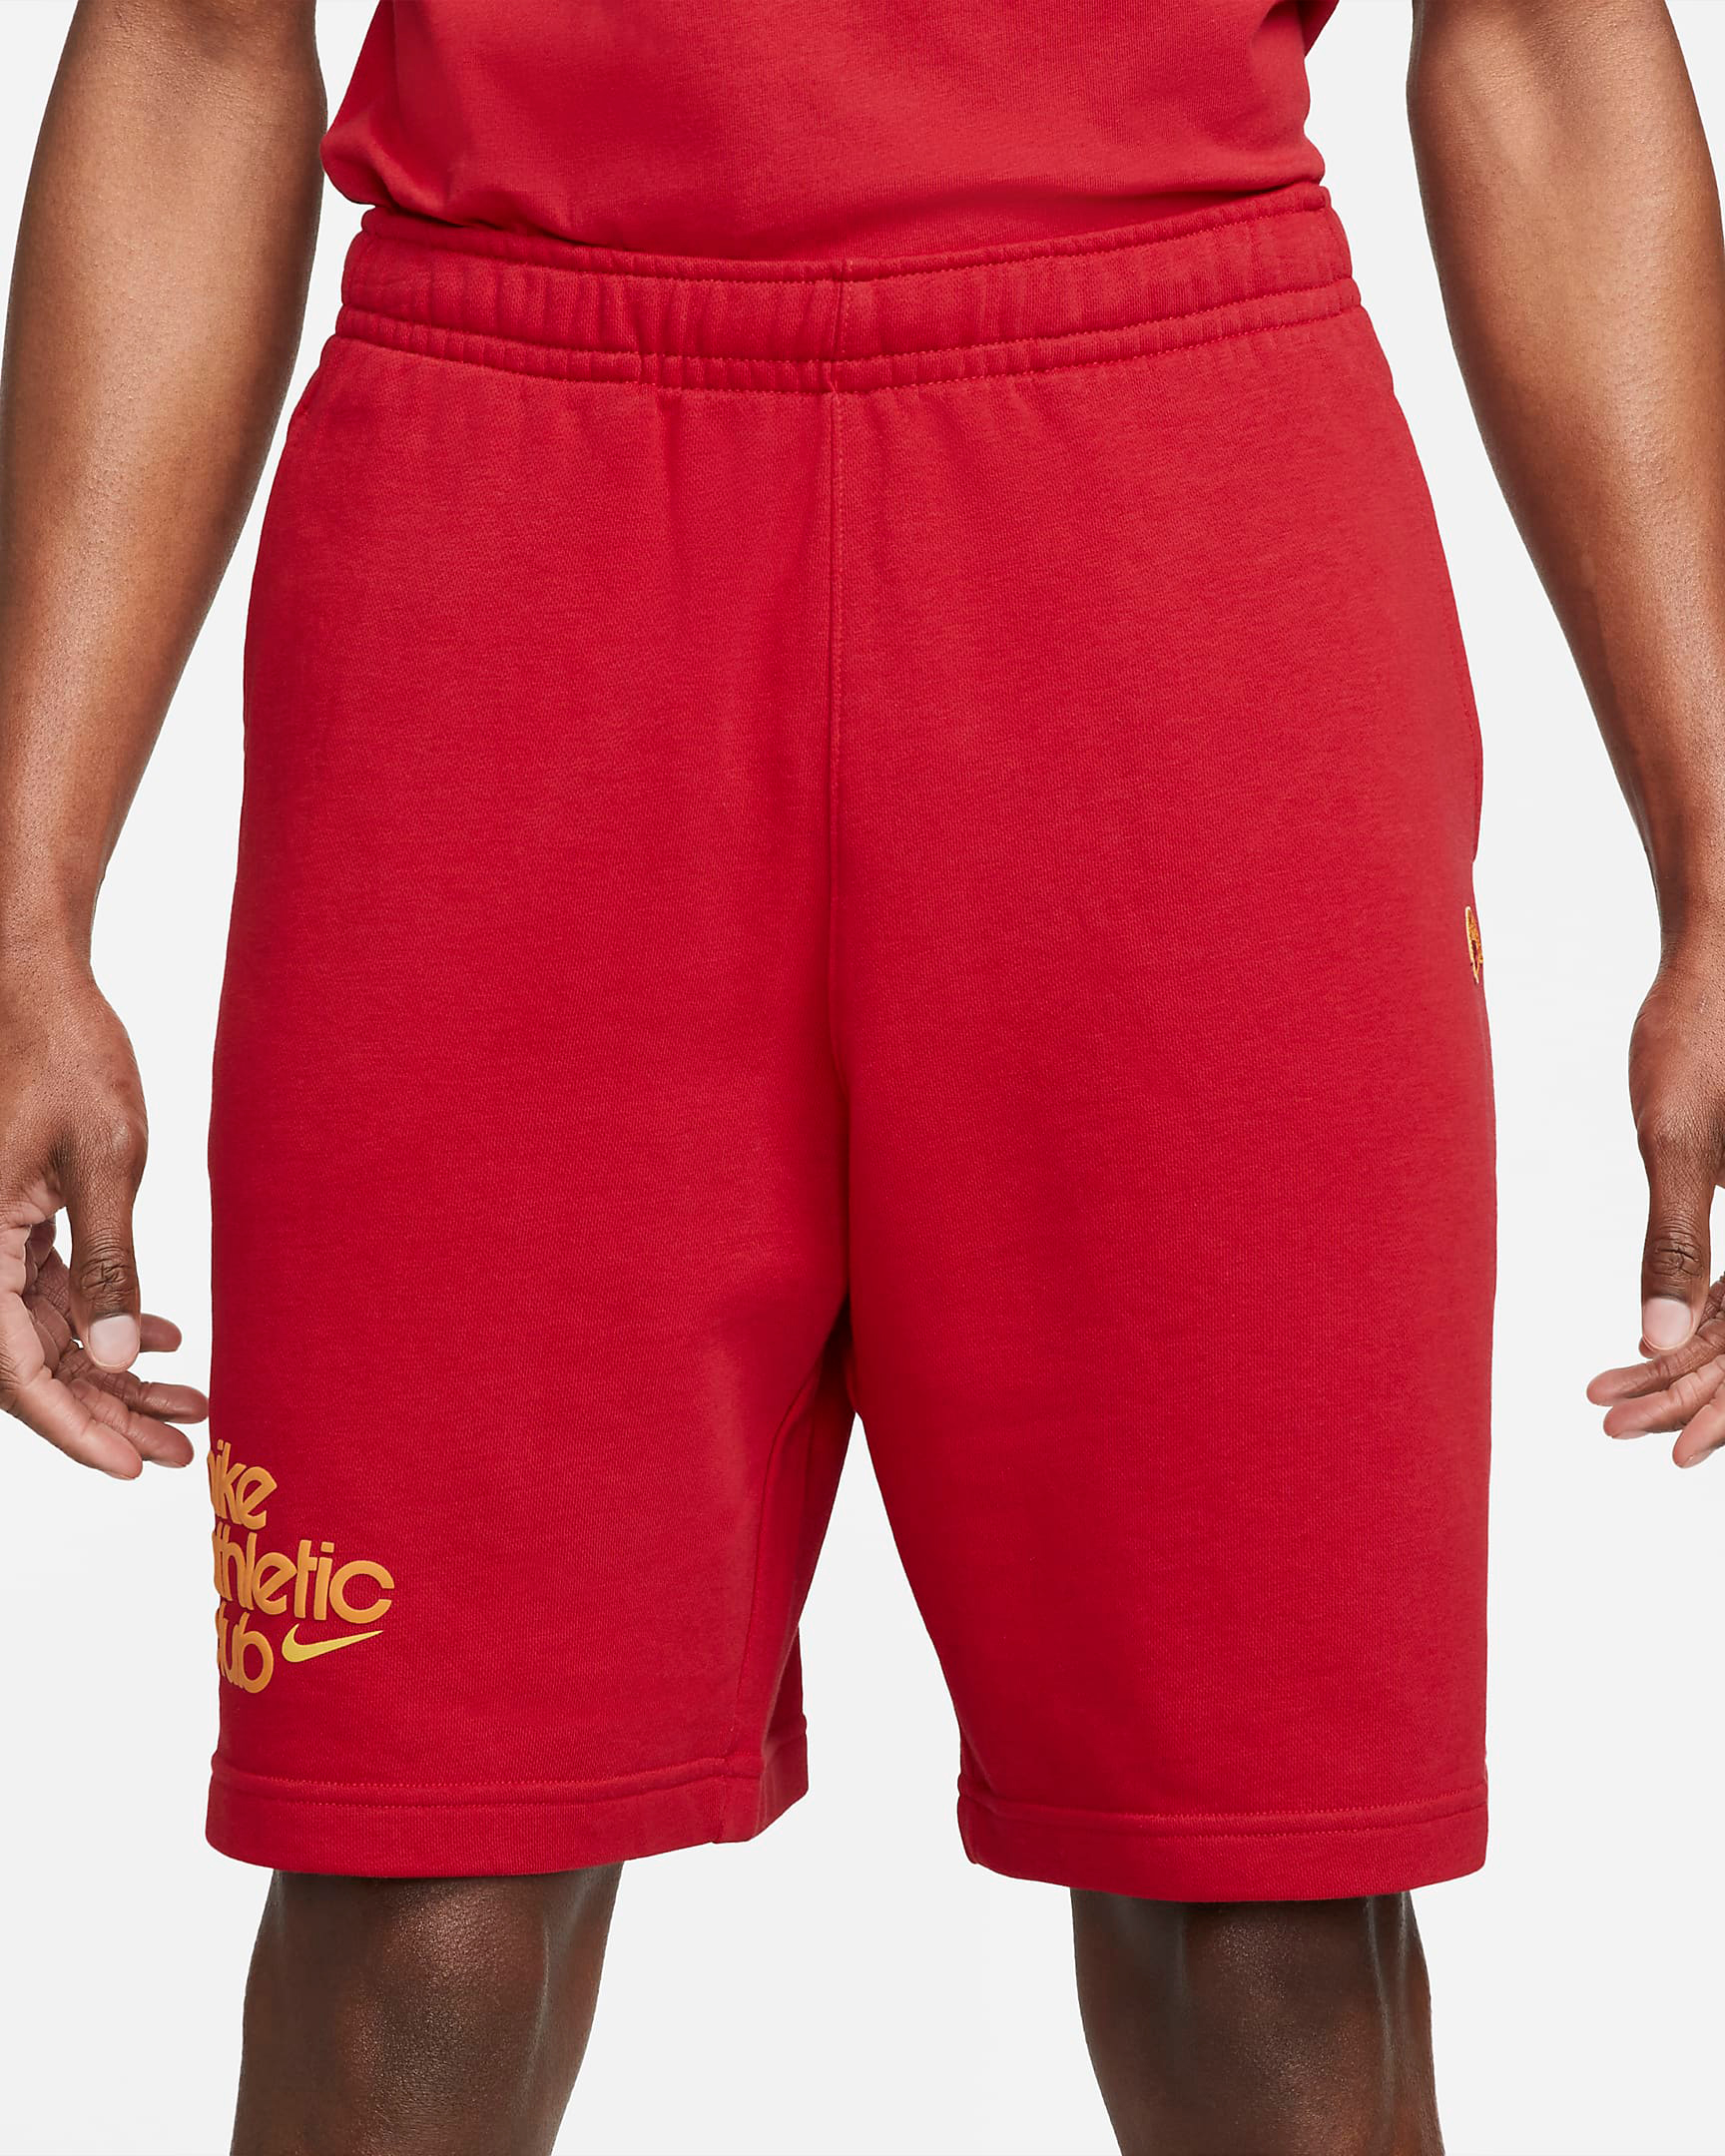 nike-athletic-club-shorts-red-yellow-1